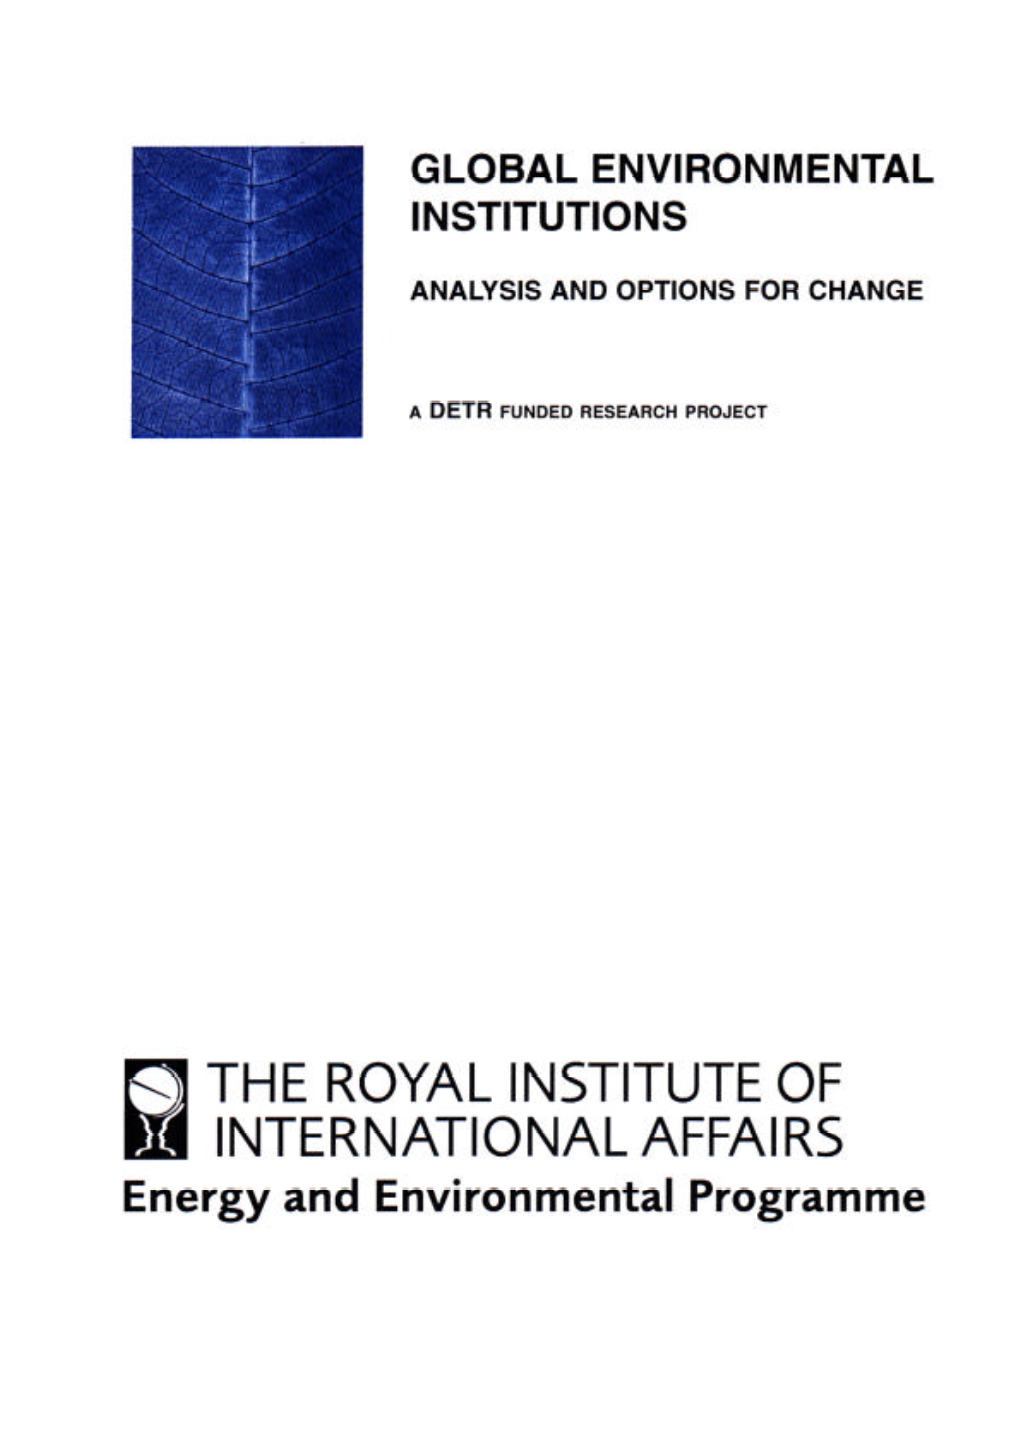 GLOBAL ENVIRONMENTAL INSTITUTIONS Analysis and Options for Change